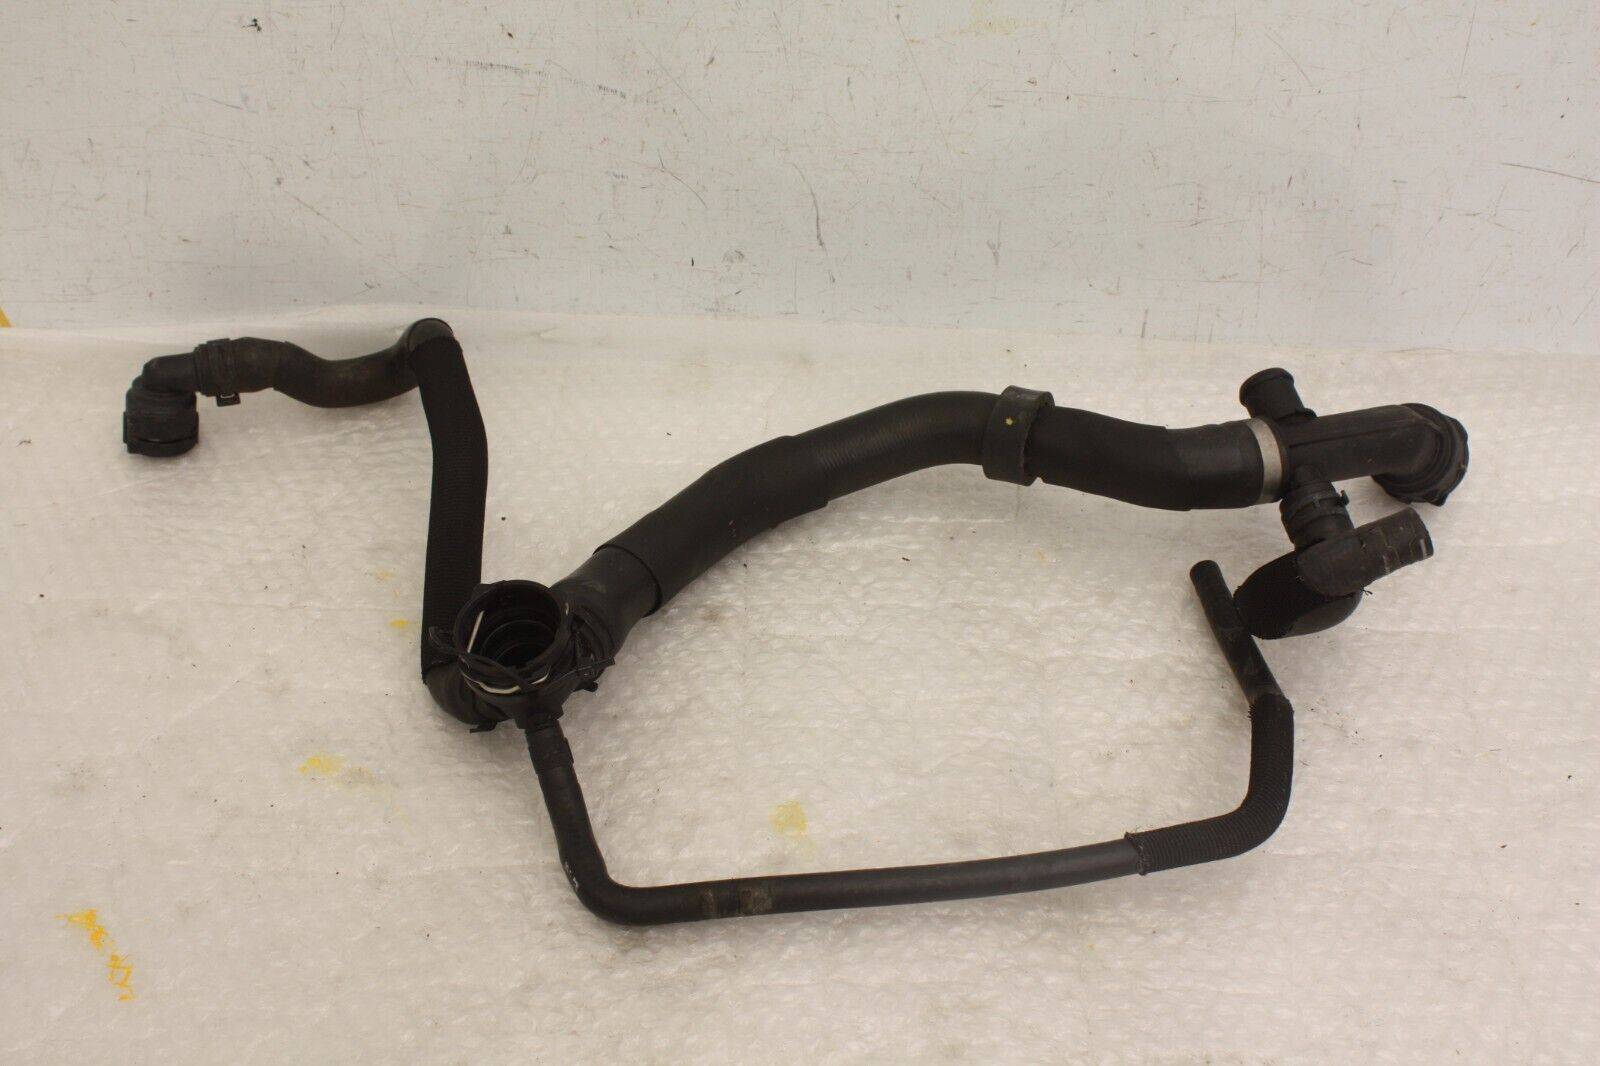 VW-Golf-Water-Coolant-Pipes-Hose-5Q0122101-Genuine-176375079536